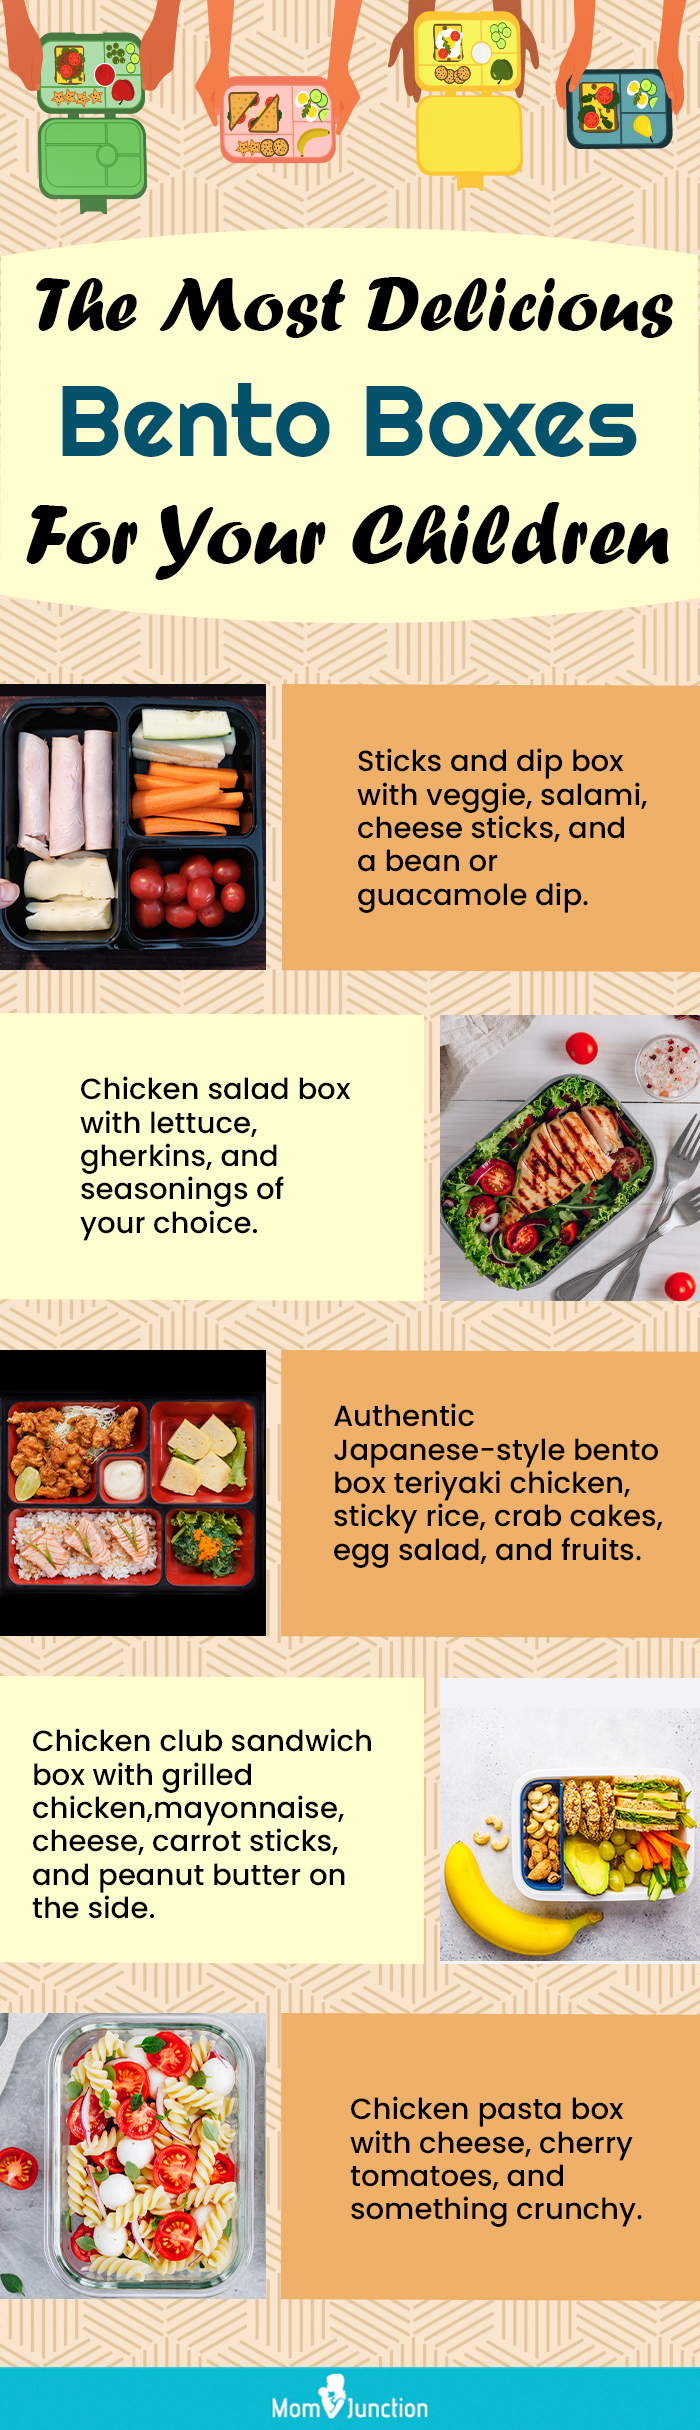 the most delicious bento boxes for your children (infographic)